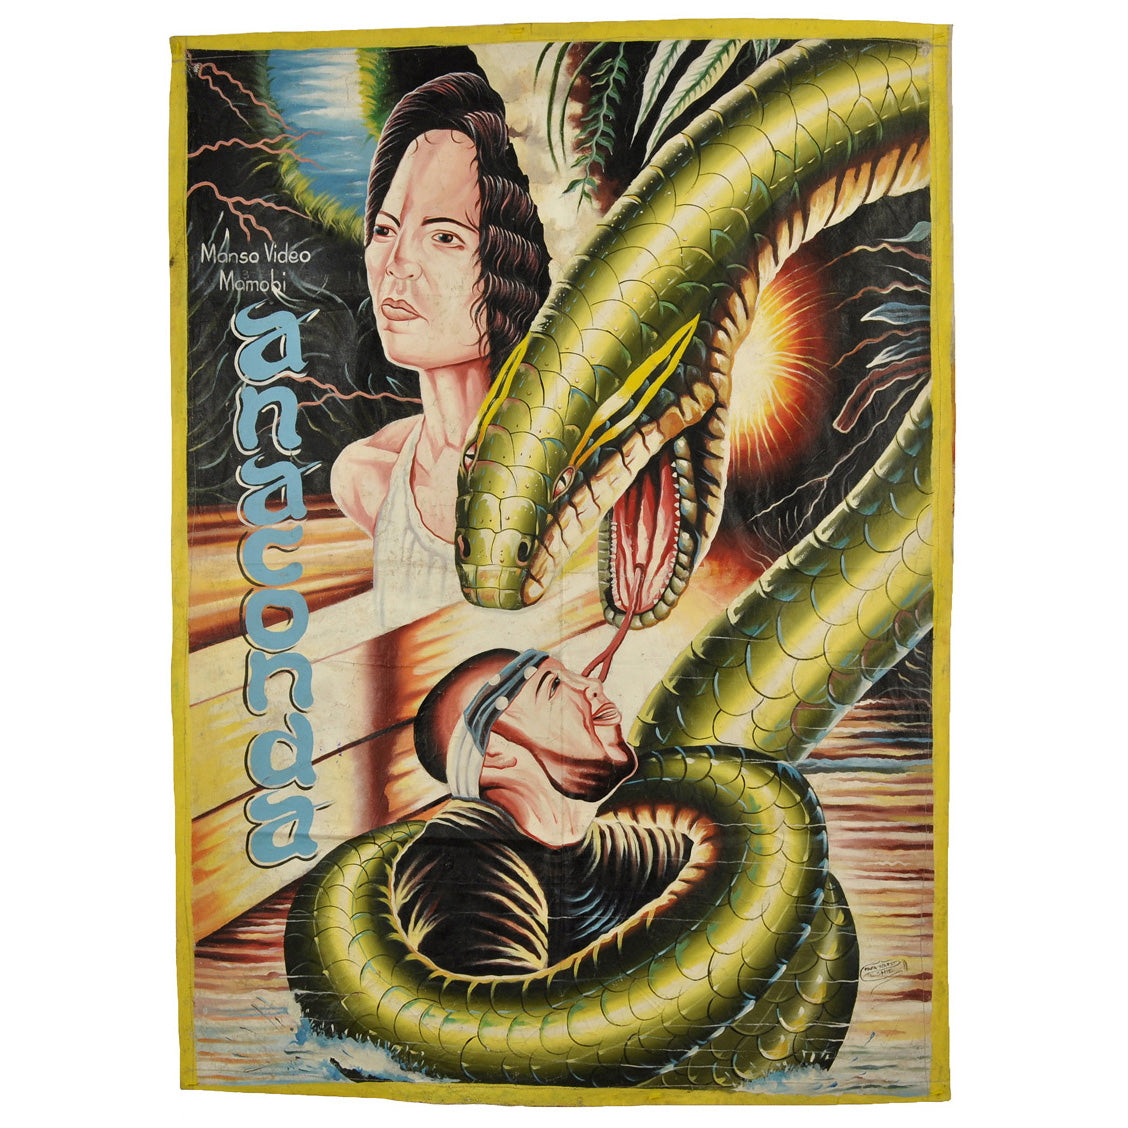 ANACONDA MOVIE POSTER HAND PAINTED IN GHANA FOR THE LOCAL CINEMA